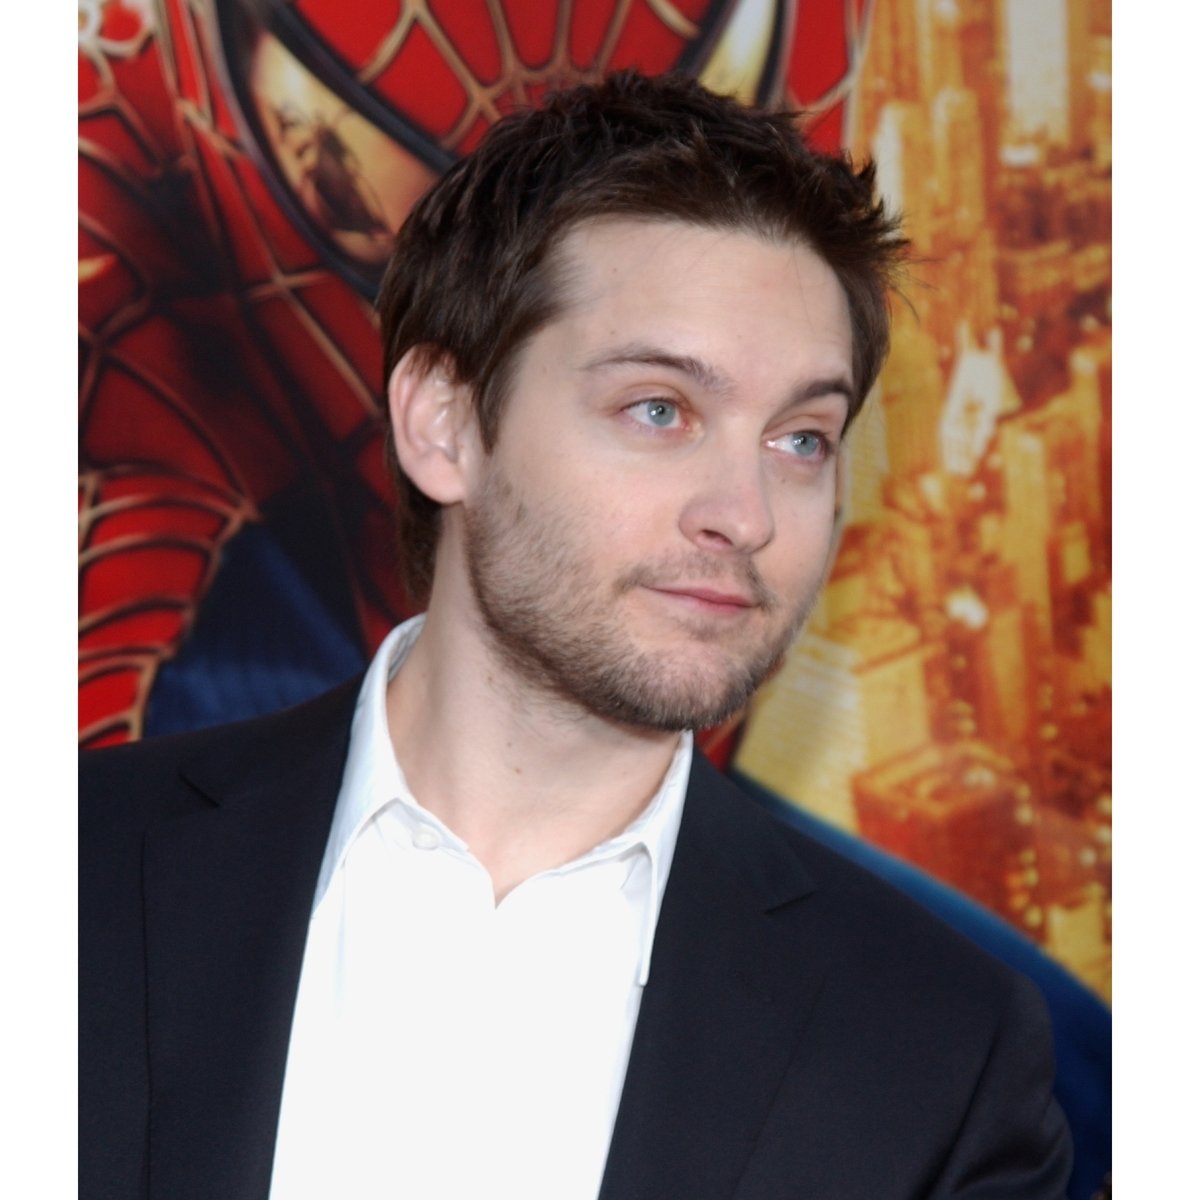 Tobey Maguire, who first played 'Spider-Man' in 2002